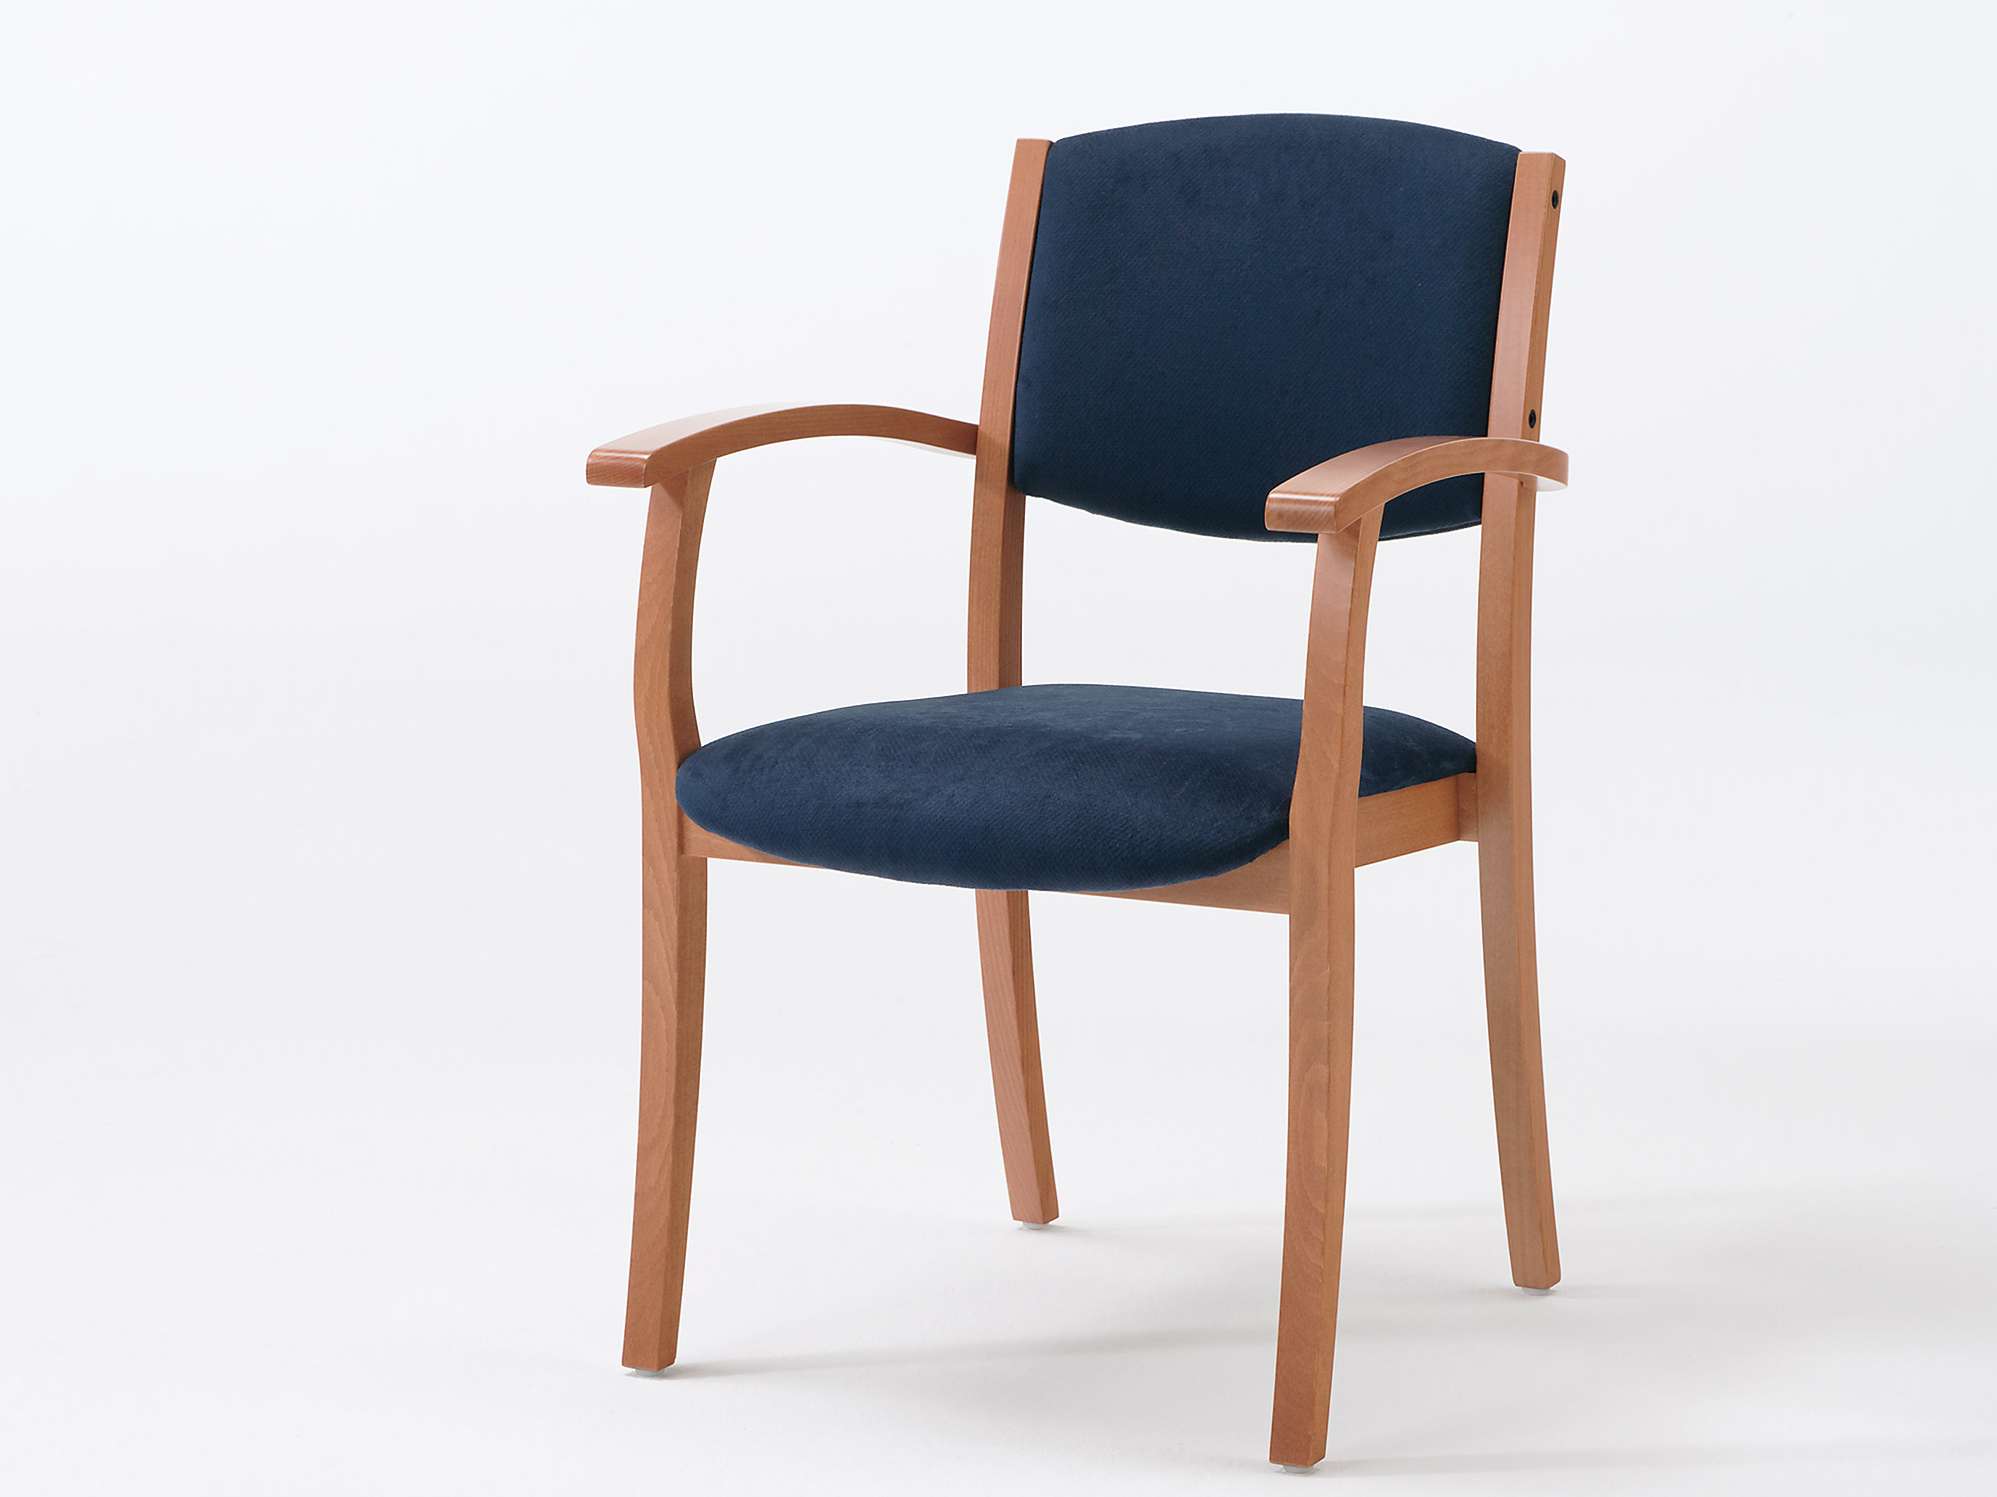 The Sedego model as a stacking armchair